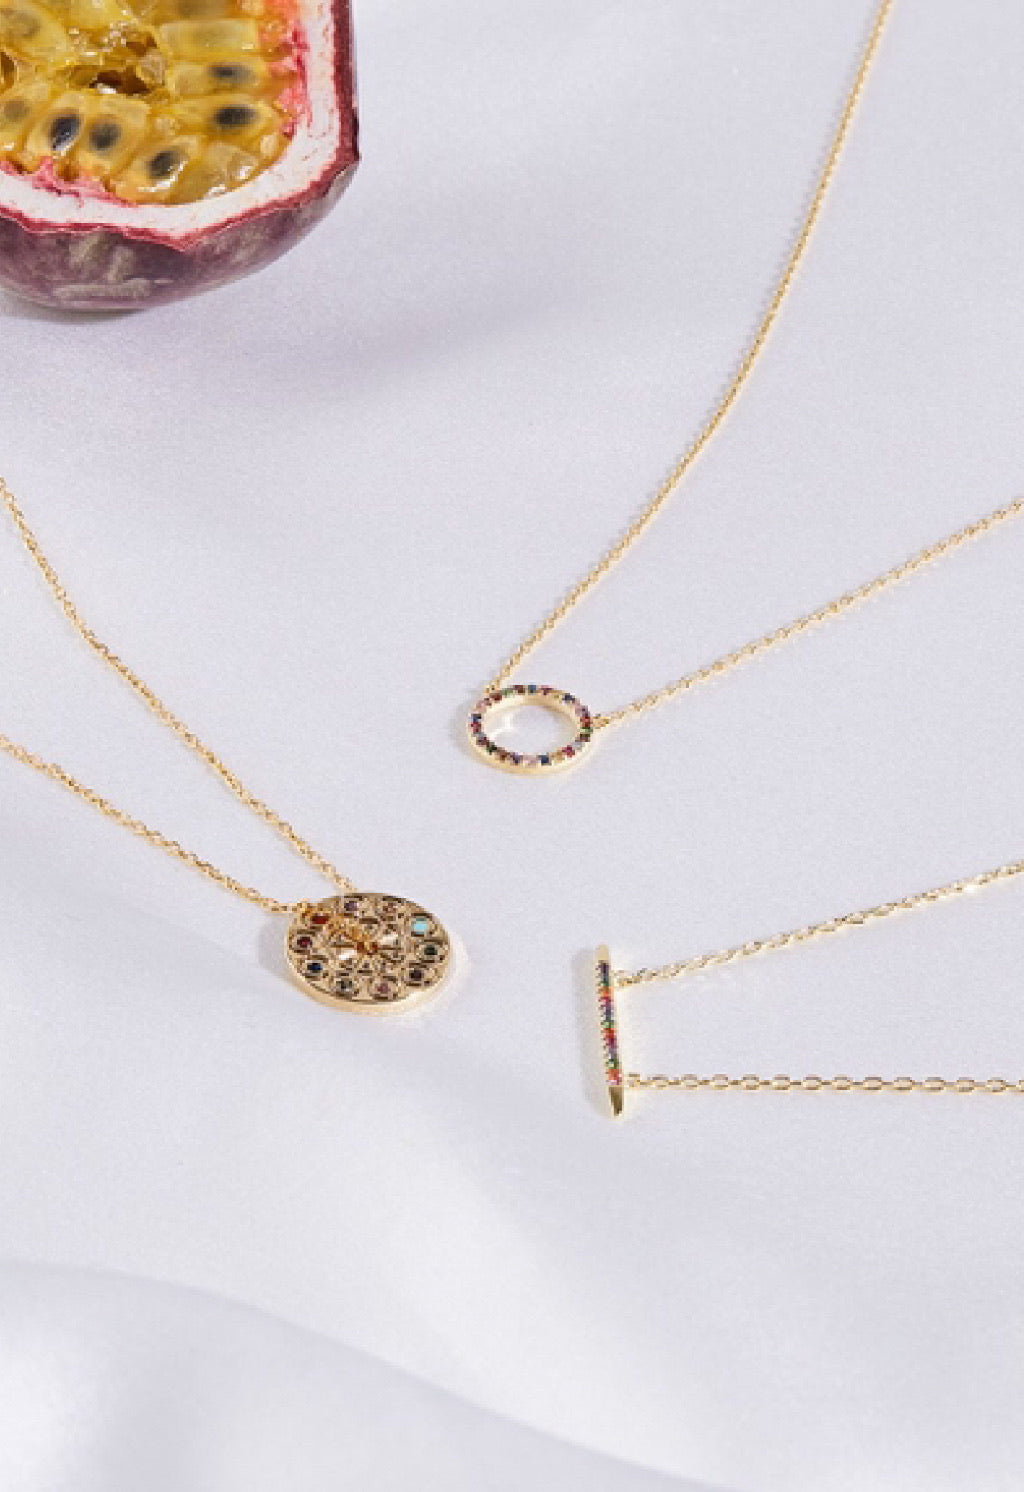 Multi CZ Circle Necklace - Gold Plated